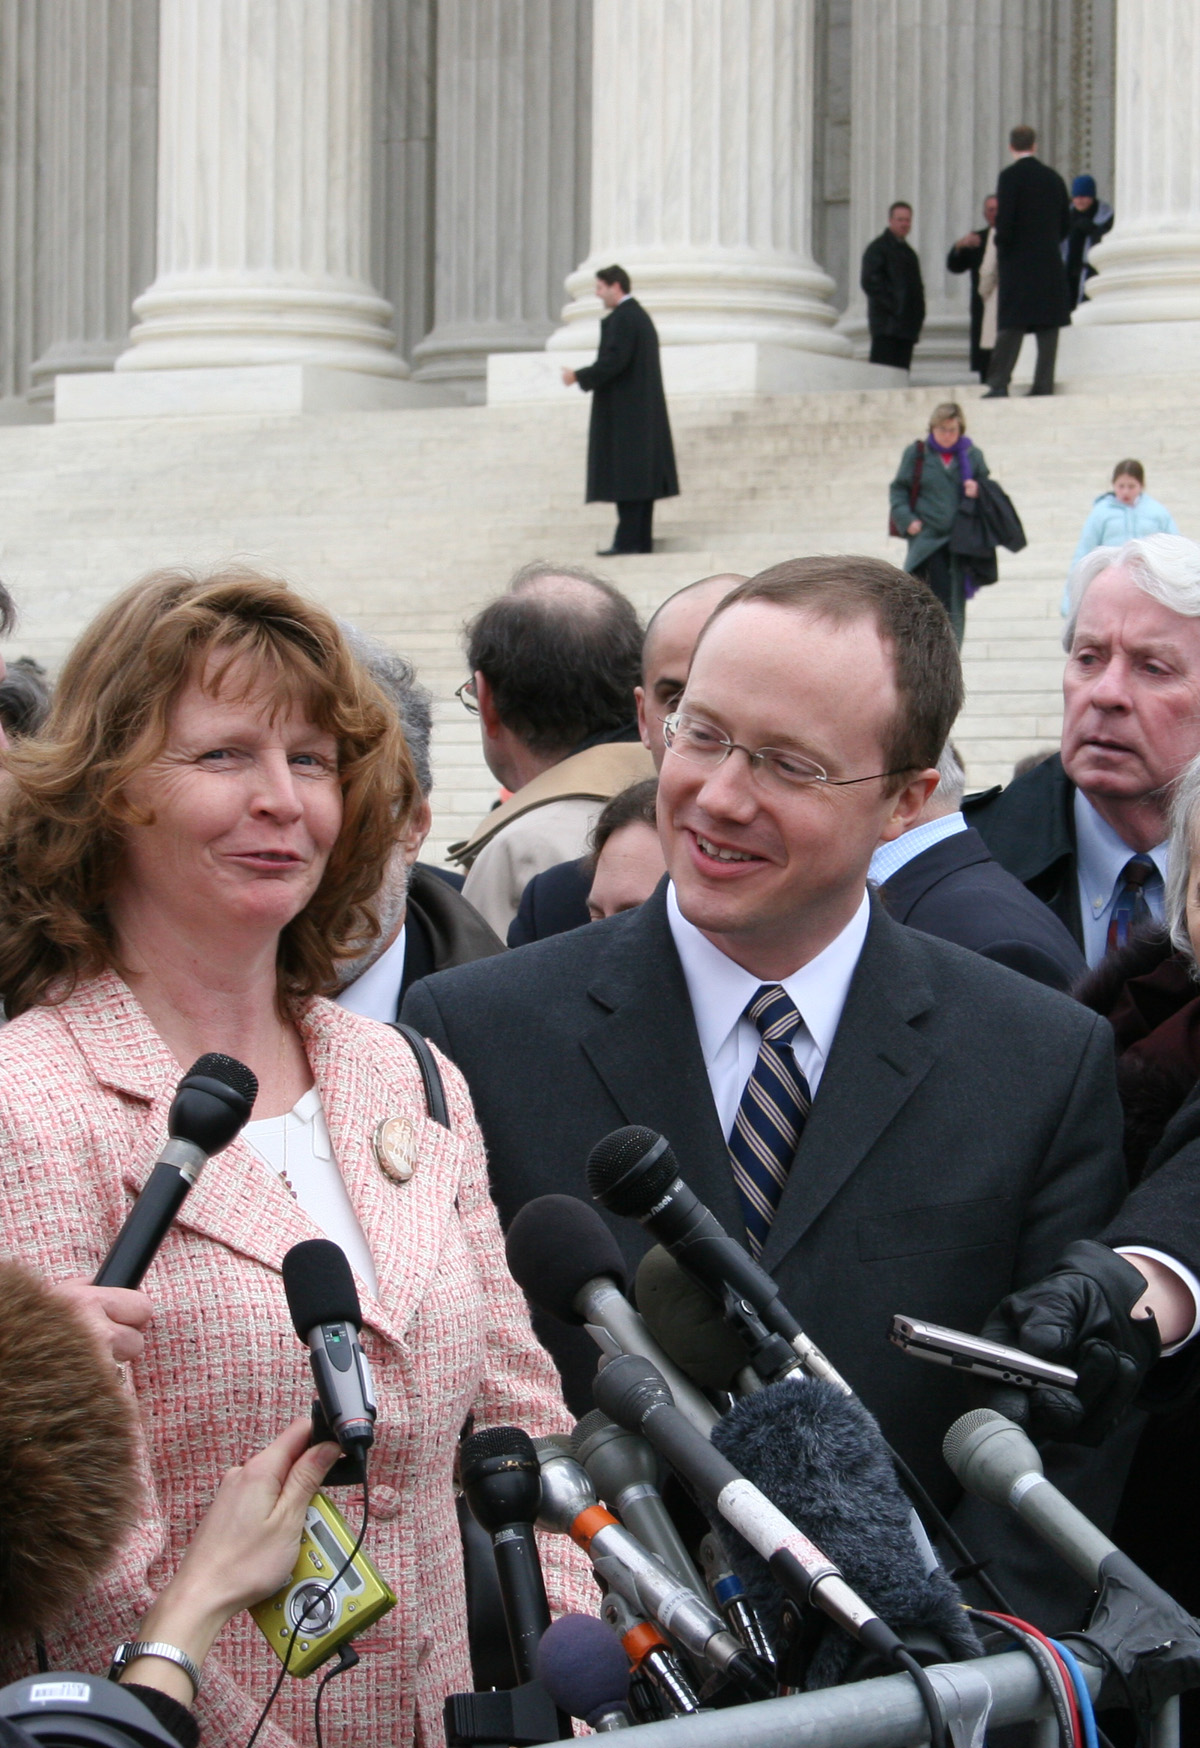 Susette Kelo and Institute for Justice lawyer Scott Bullock stand outside the Supreme Court after oral arguments in the case Kelo v. City of New London. (Photo: Institute for Justice)